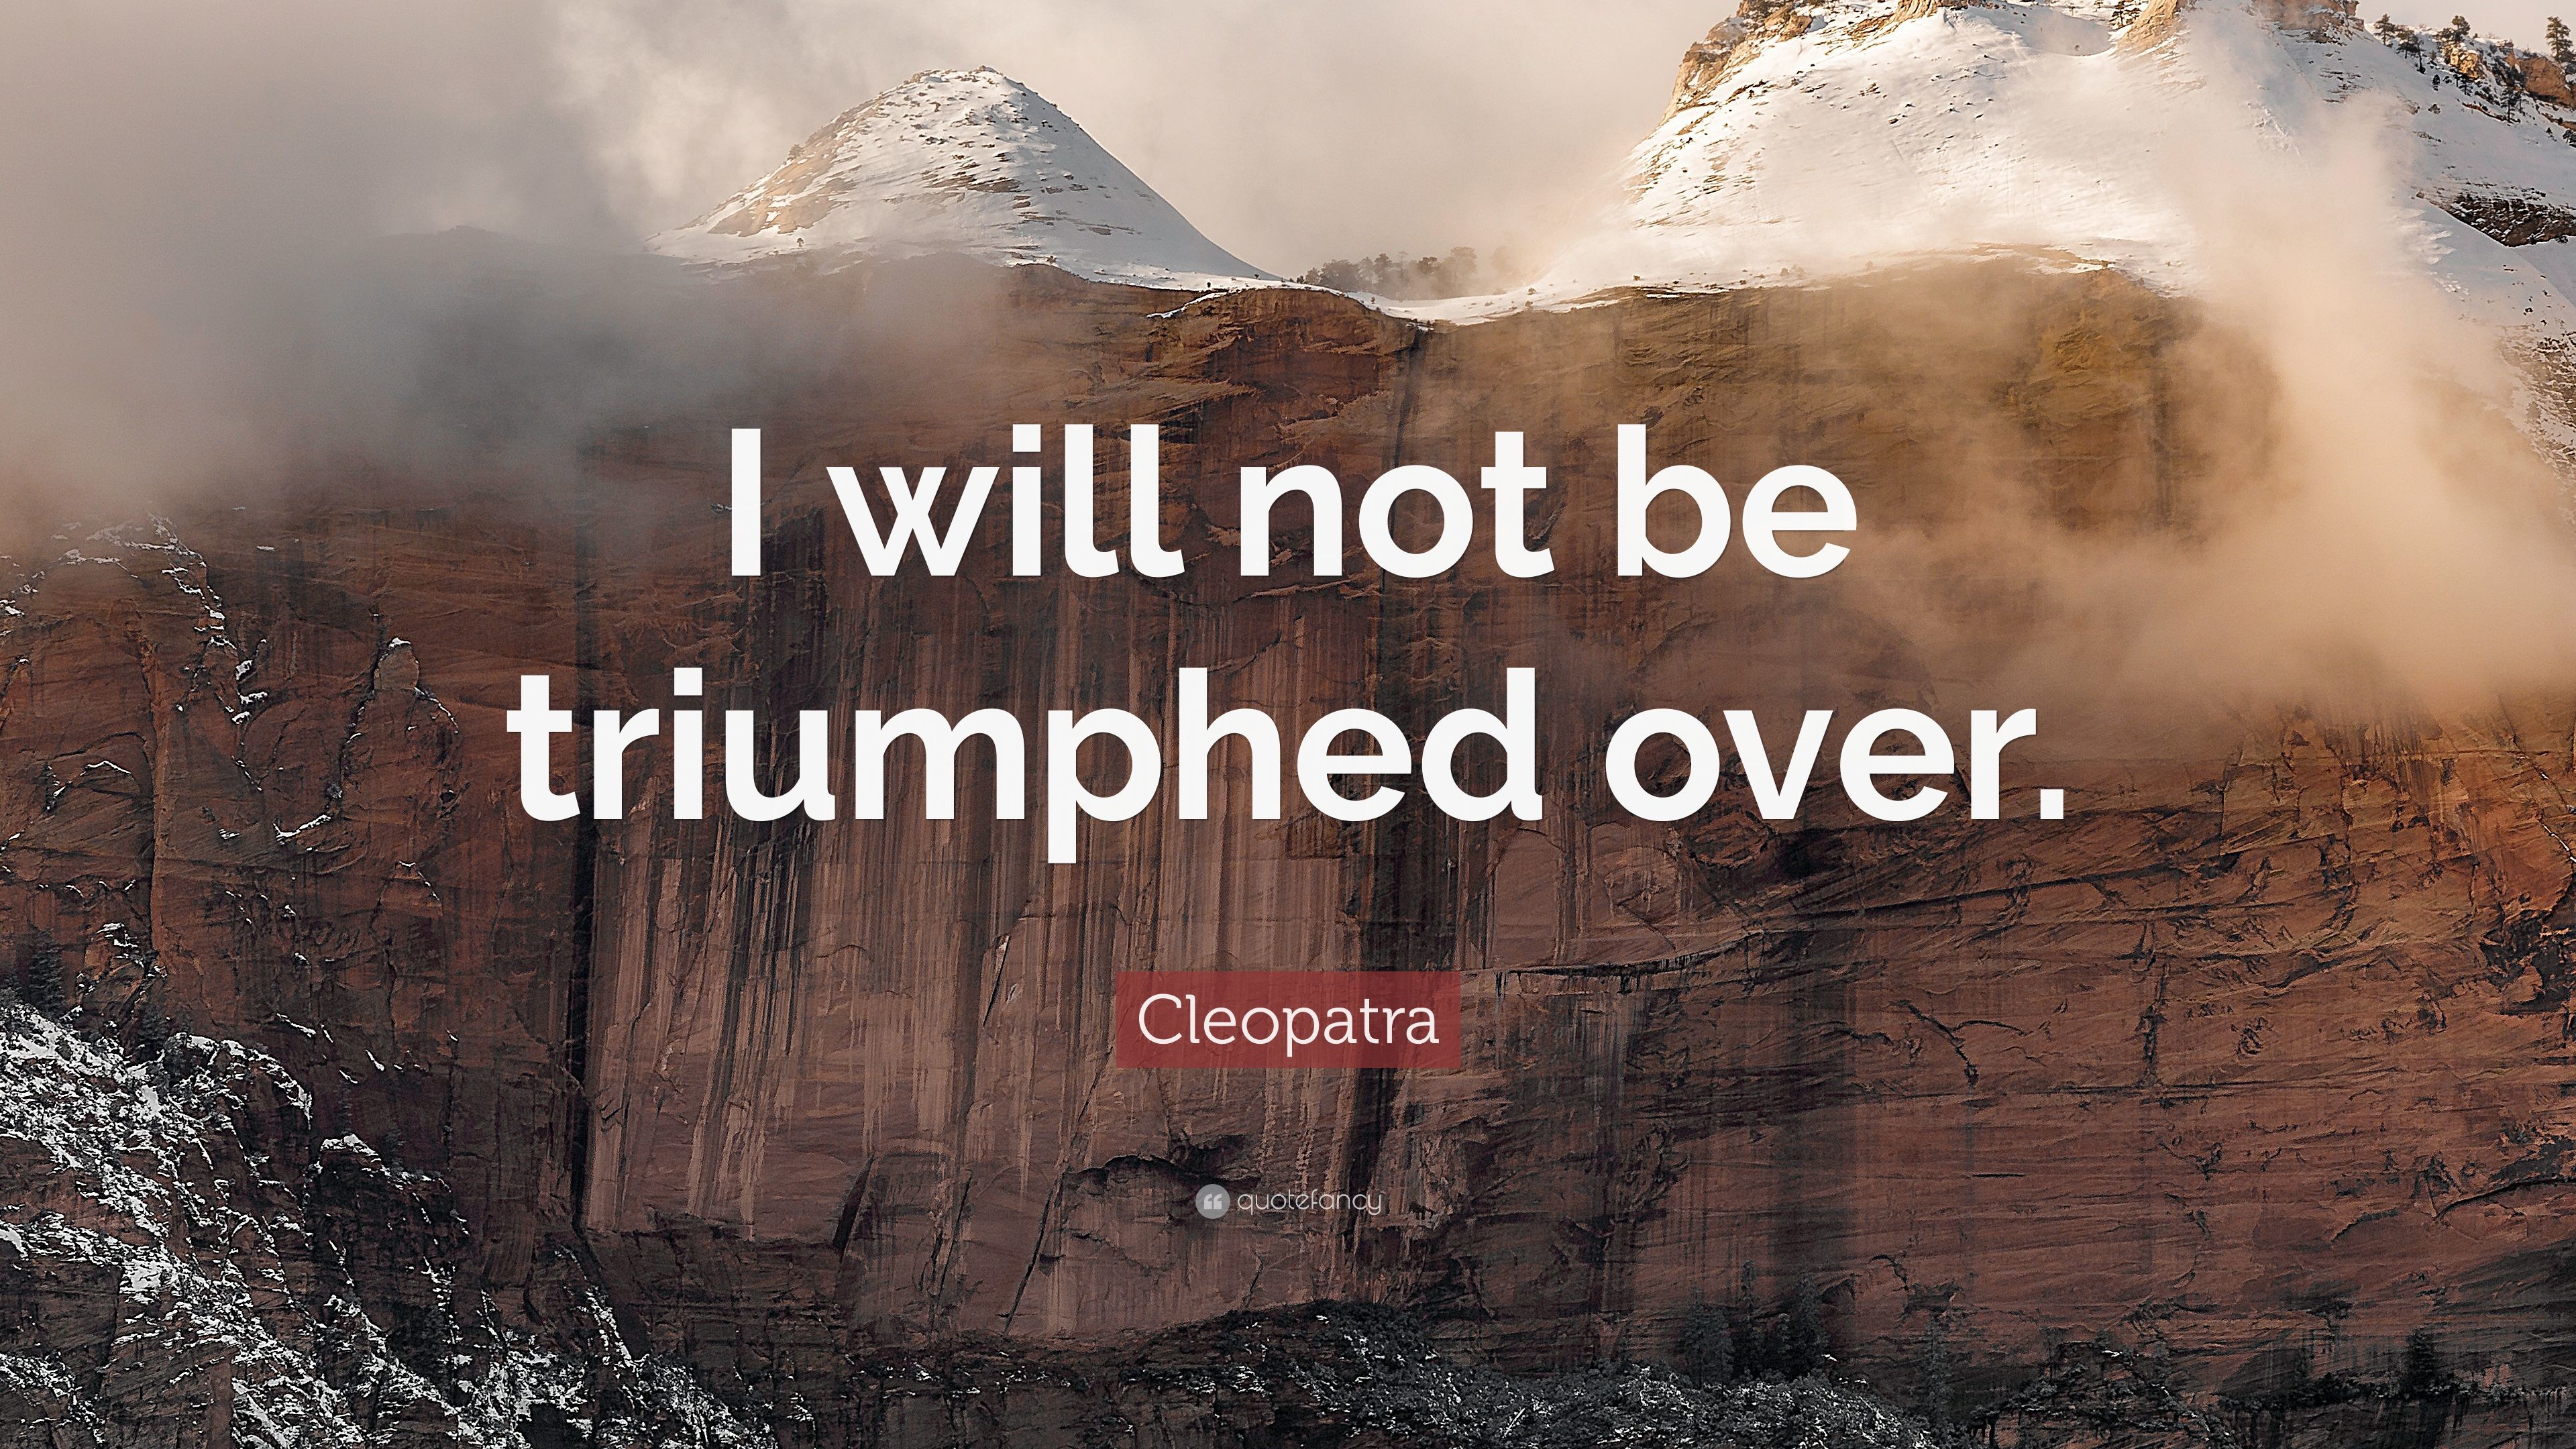 3840x2160 Cleopatra Quote: “I will not be triumphed over.”